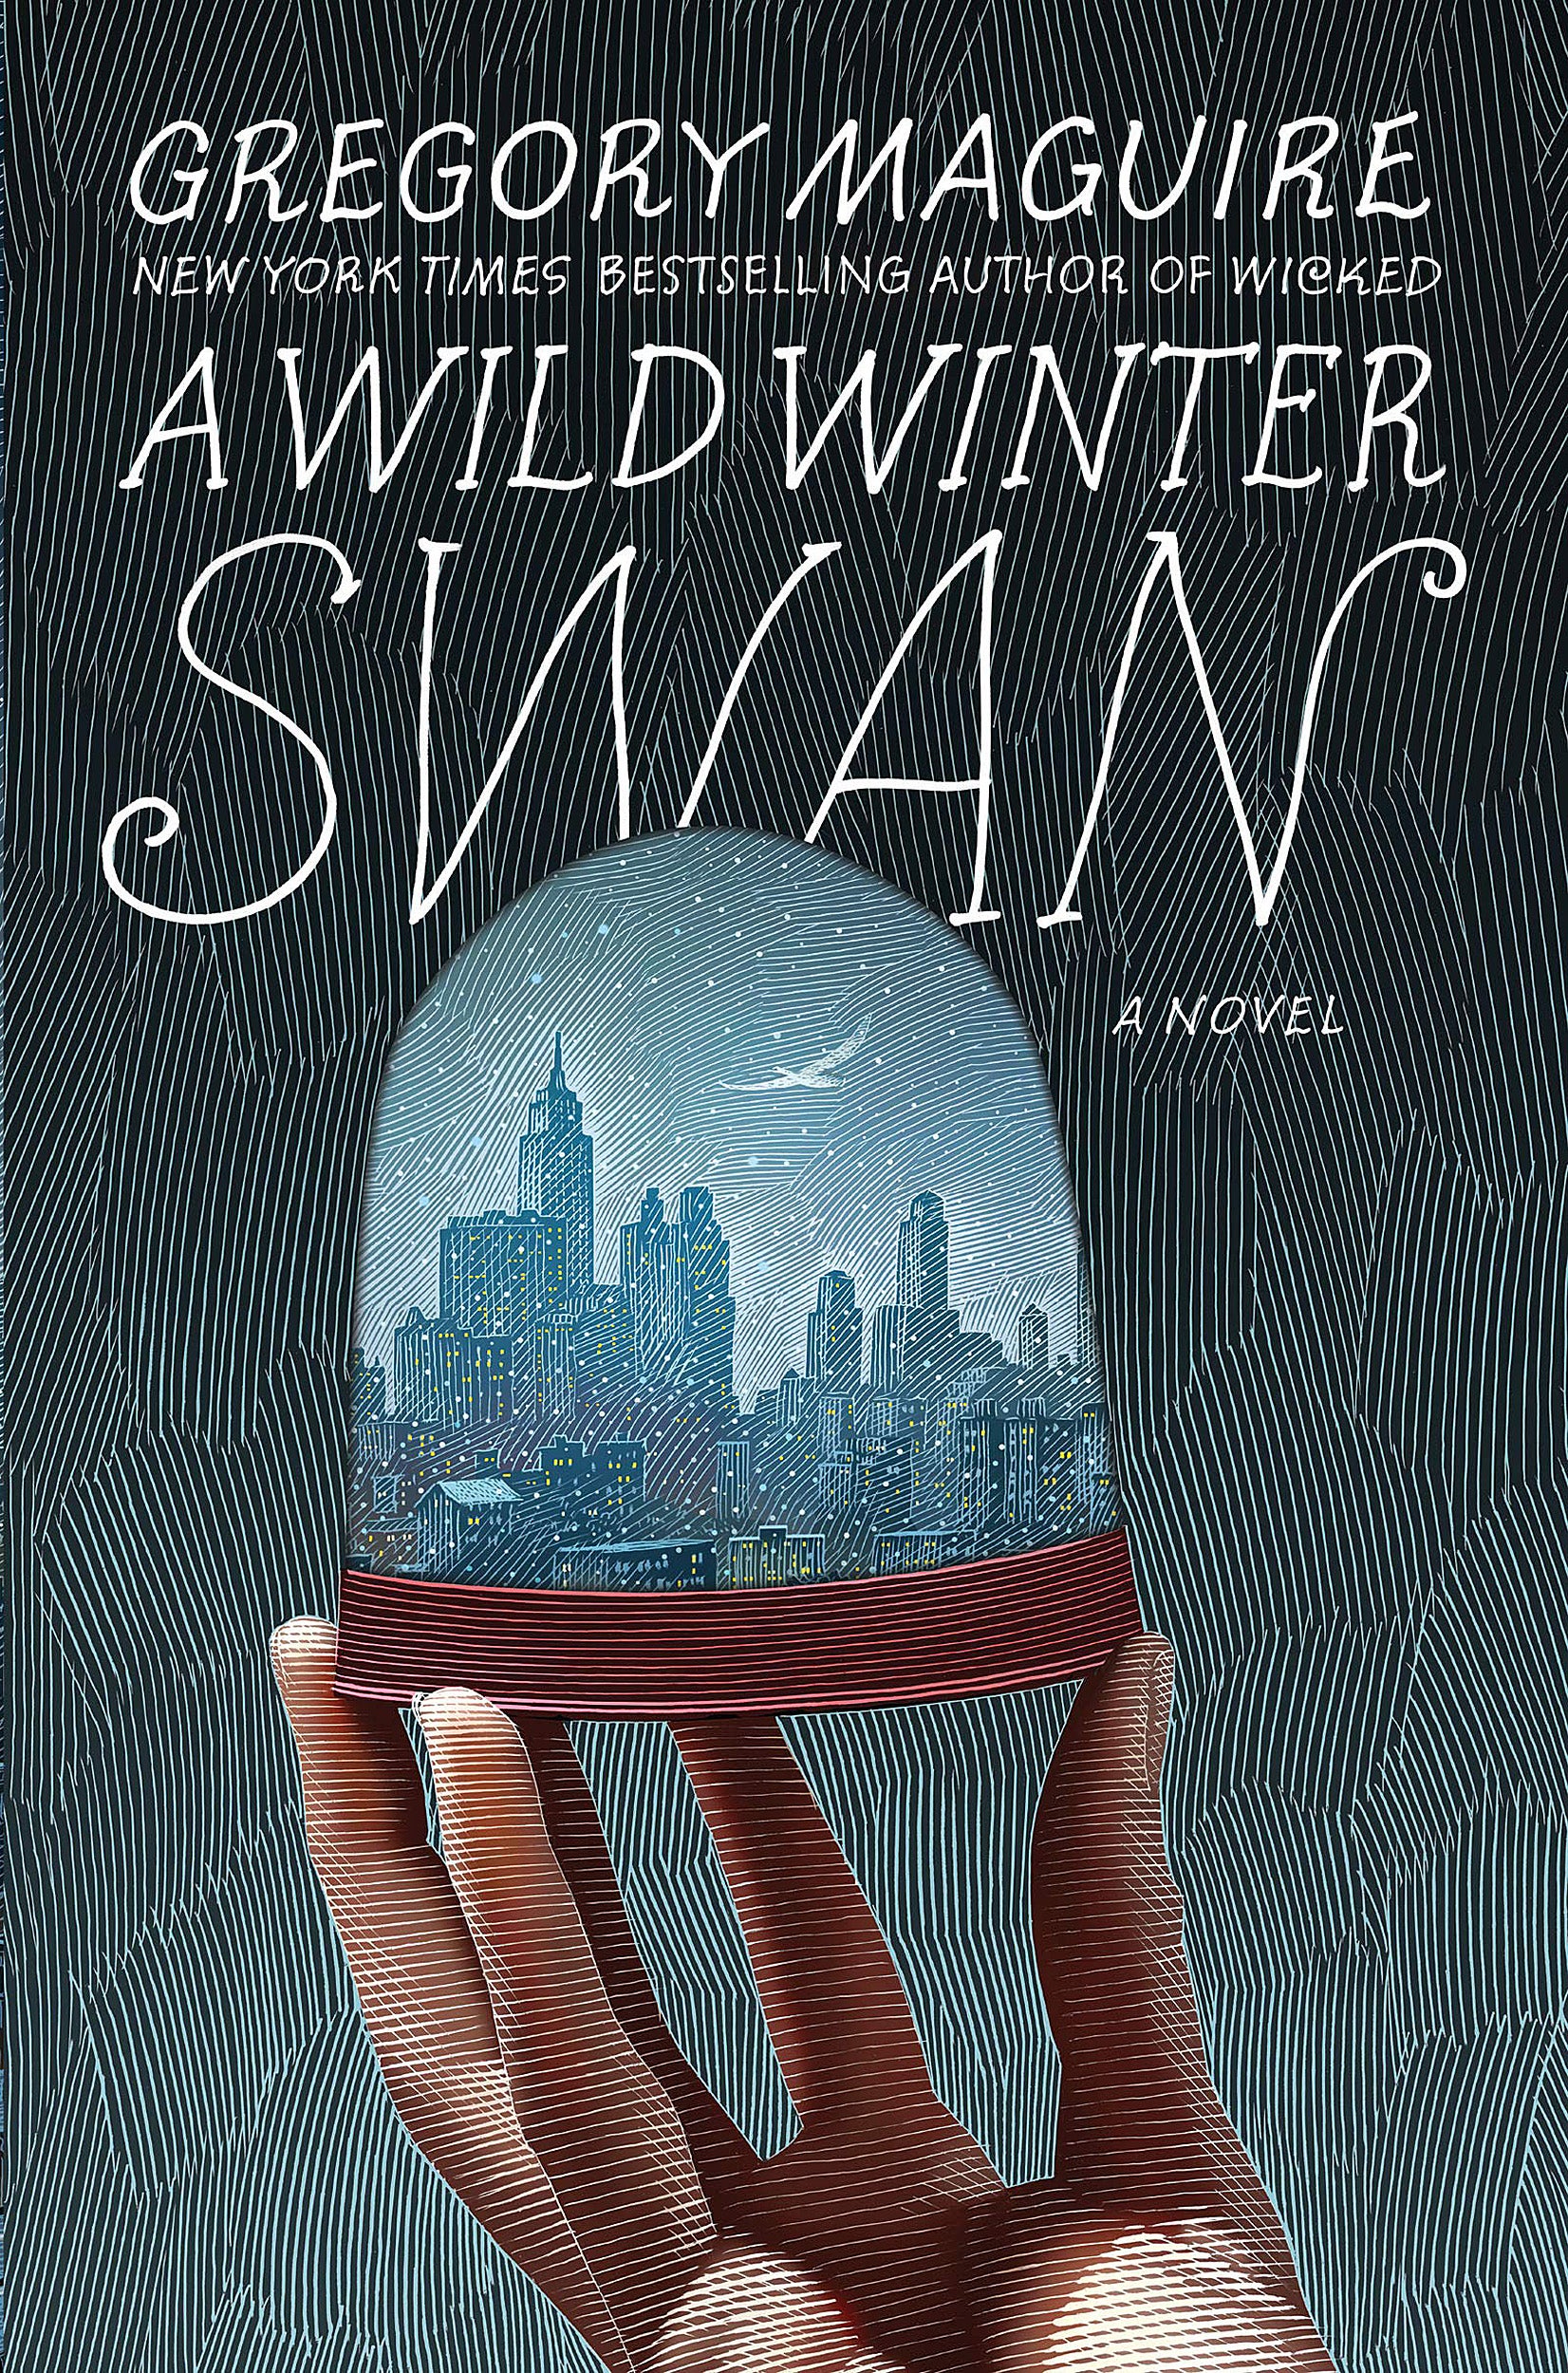 Cover of “A Wild Winter Swan” by Gregory Maguire.